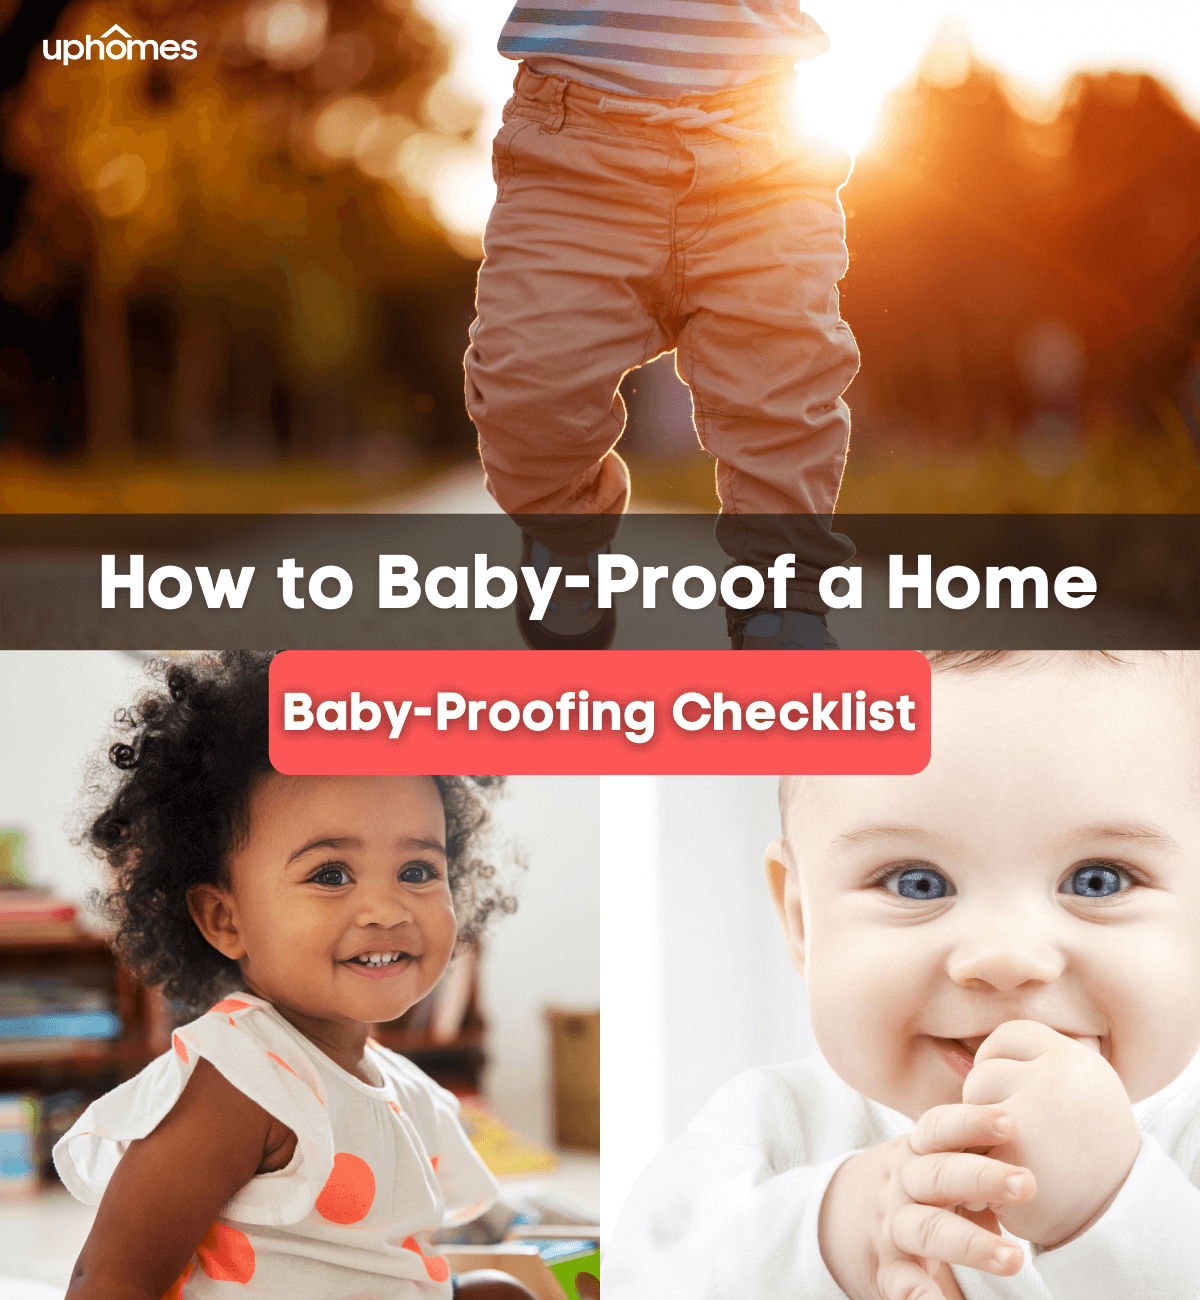 How to Baby-Proof a Home - Baby-proofing house checklist for parents of newborns